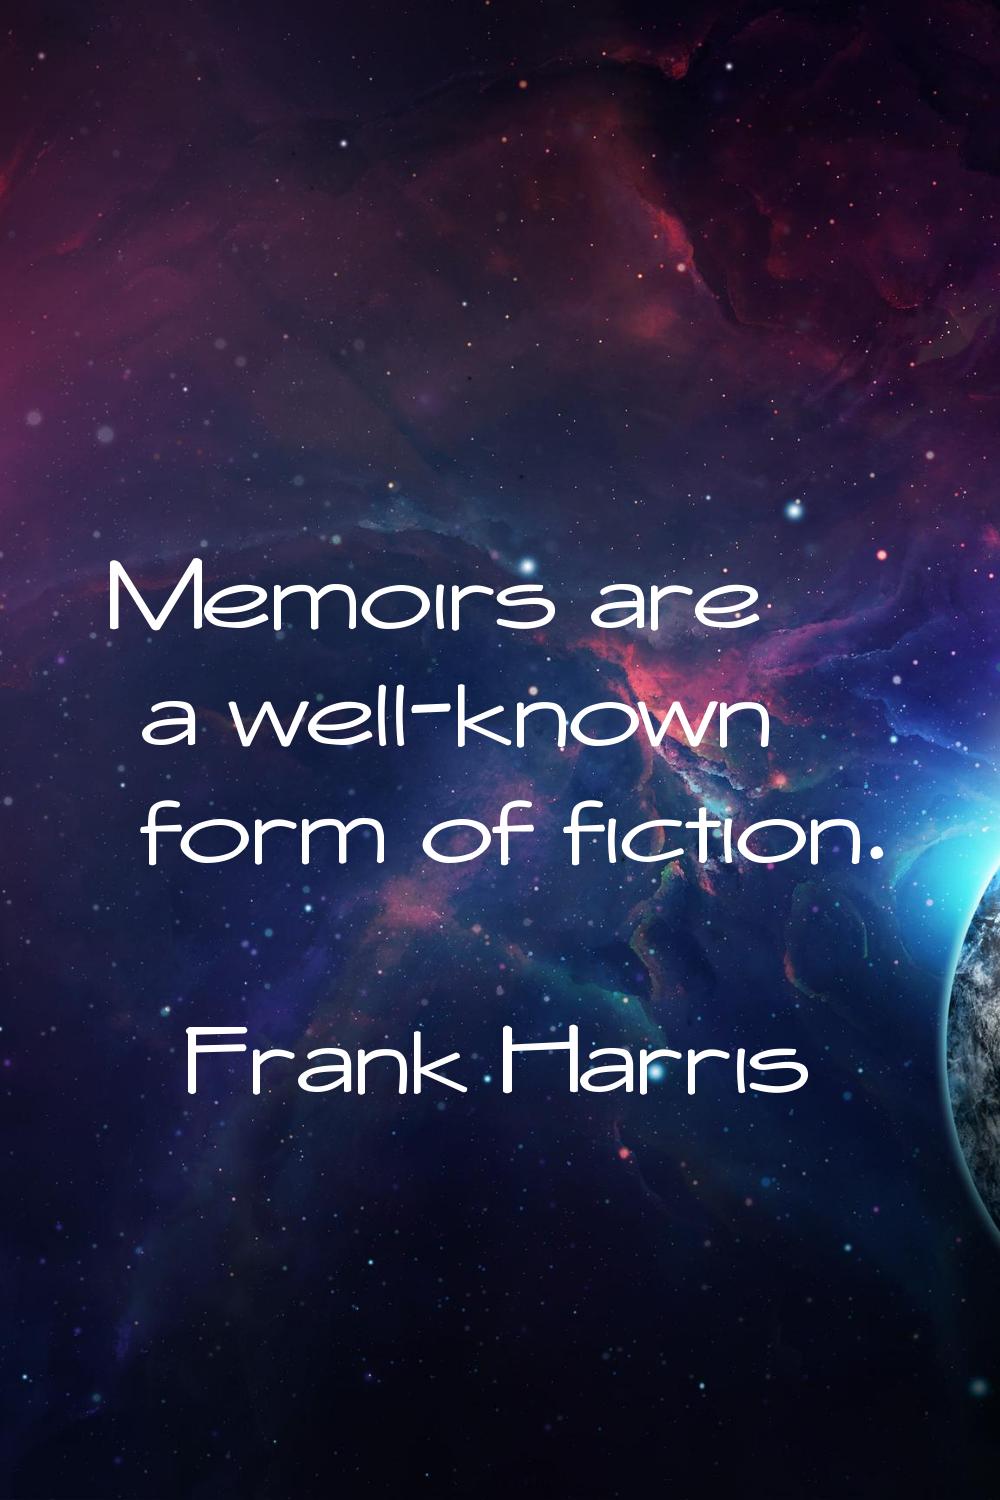 Memoirs are a well-known form of fiction.